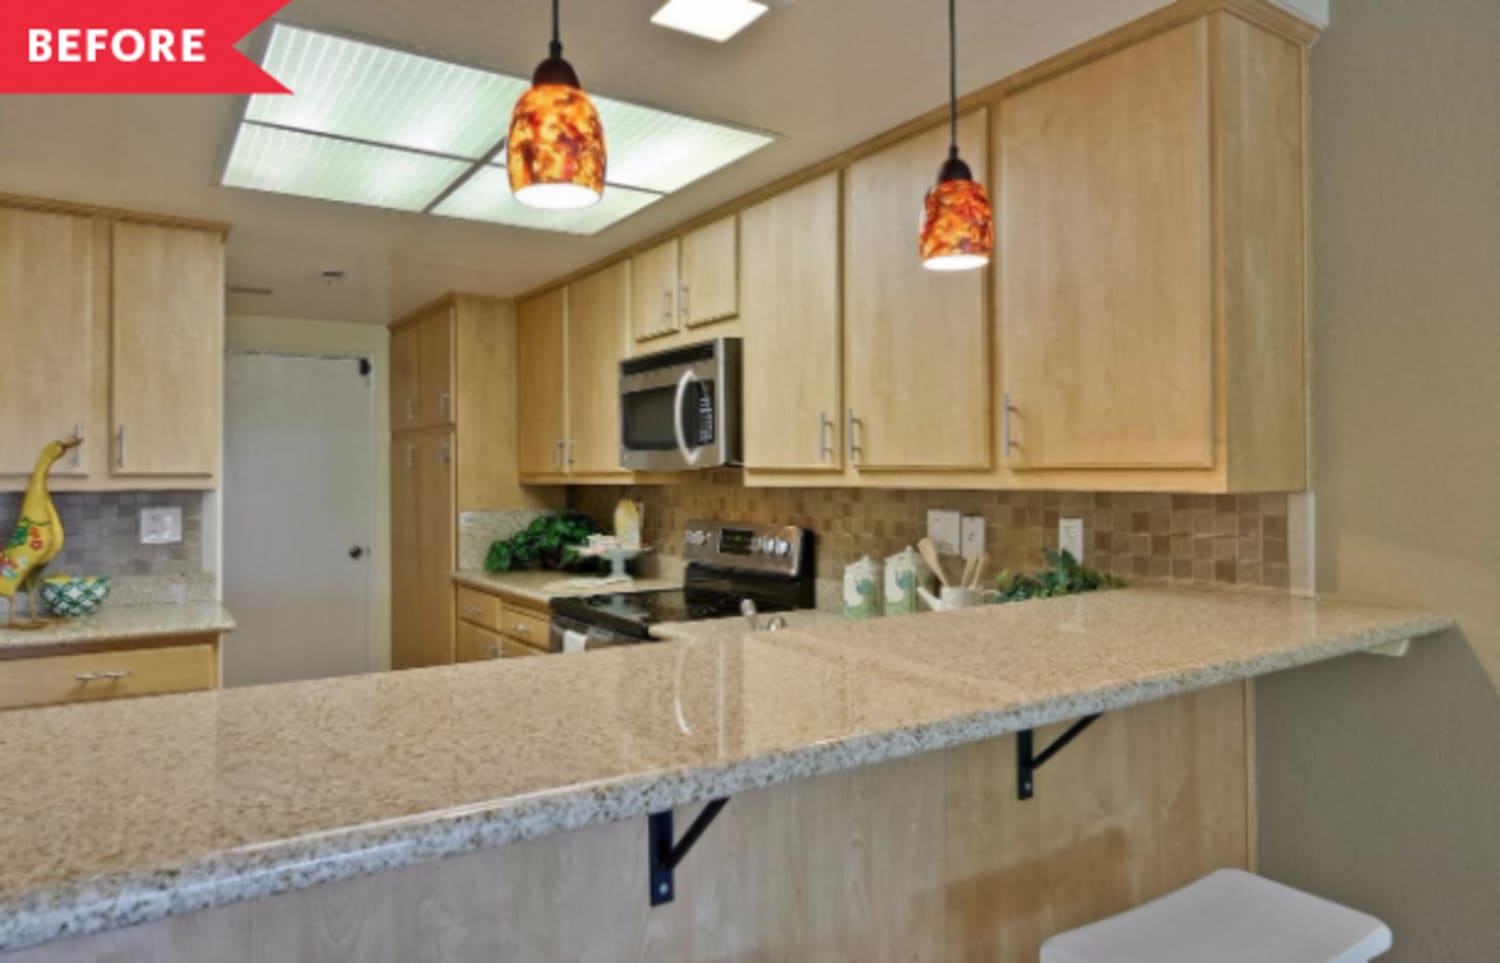 Before & After: A $500 Kitchen Redo Shows Just How Far Little Changes Can Go